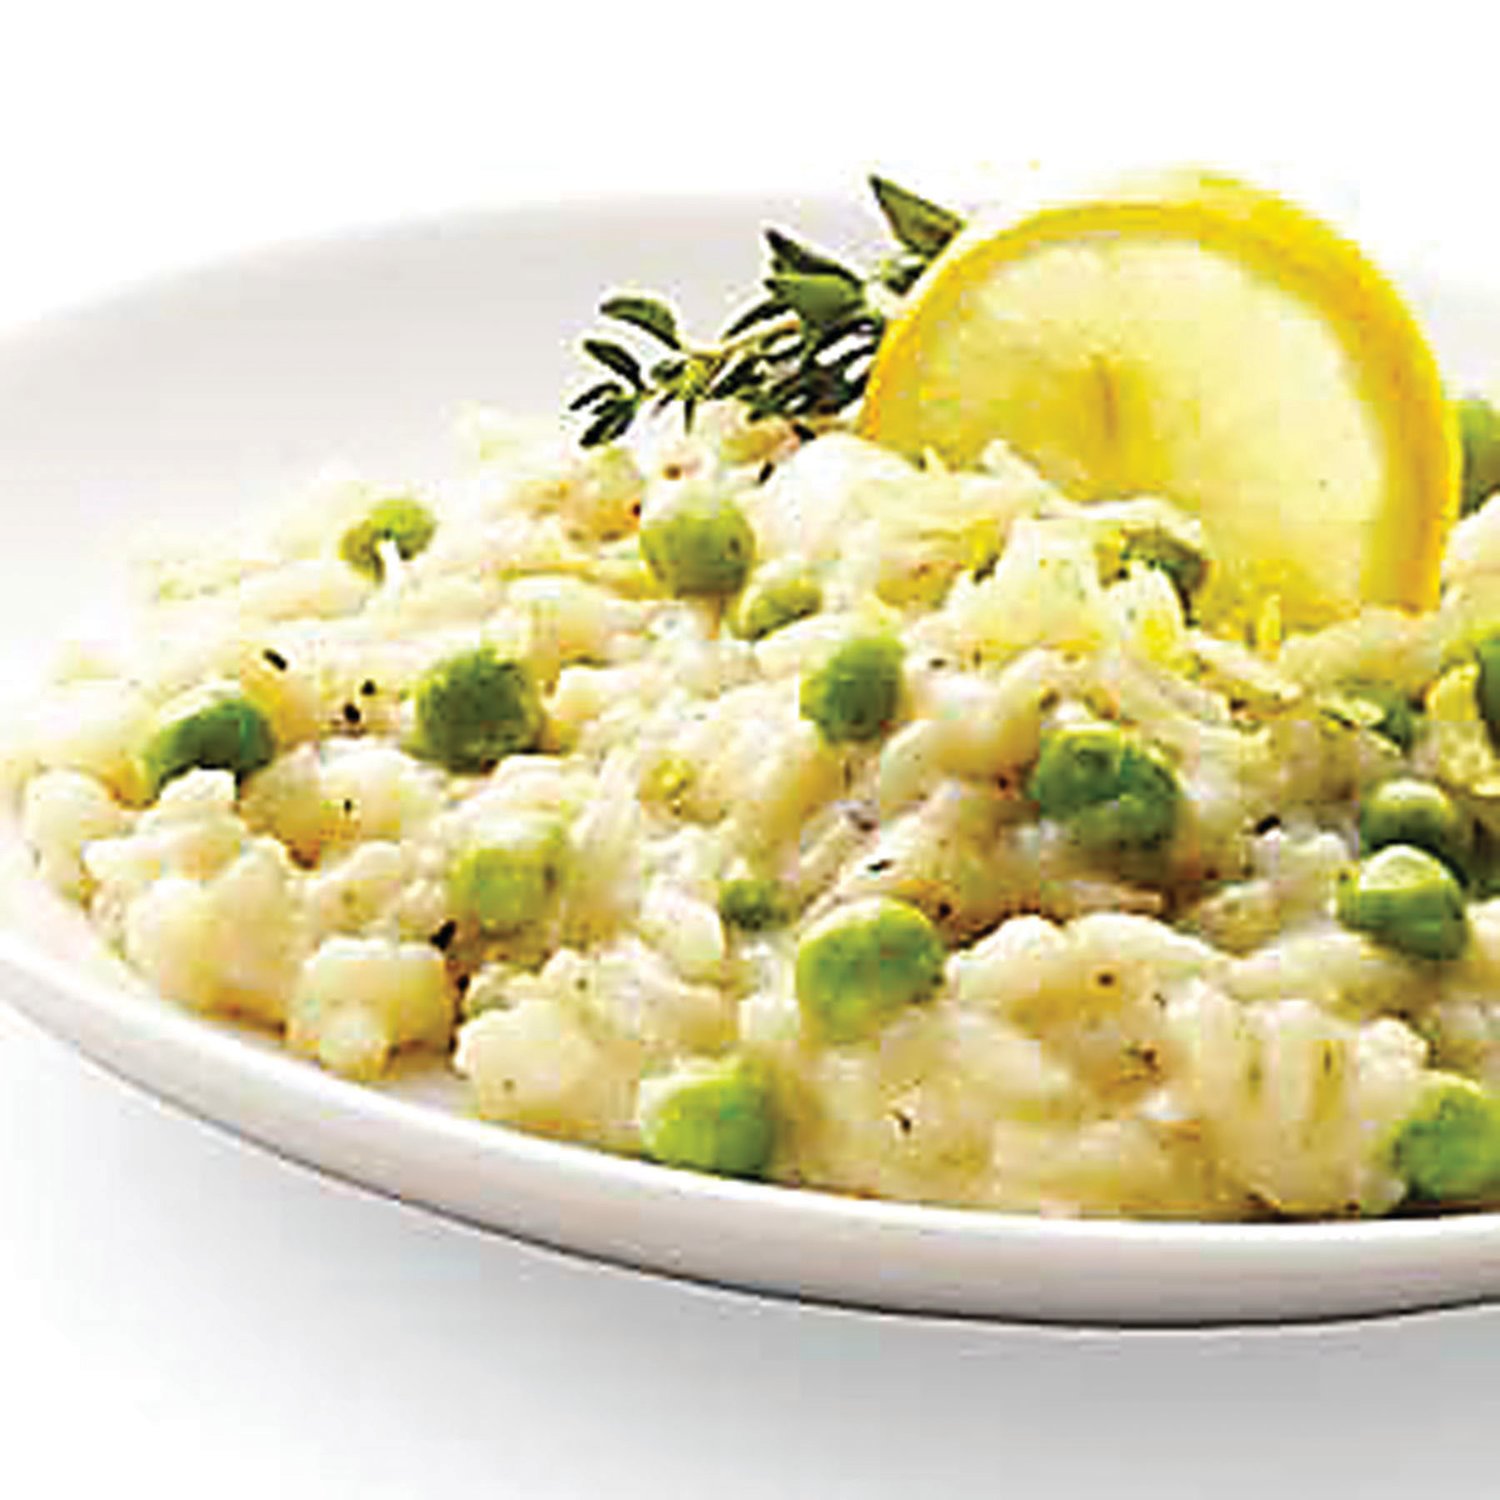 Lemon and fresh peas add flavor and texture to this spring recipe for Lemon Risotto with Peas.